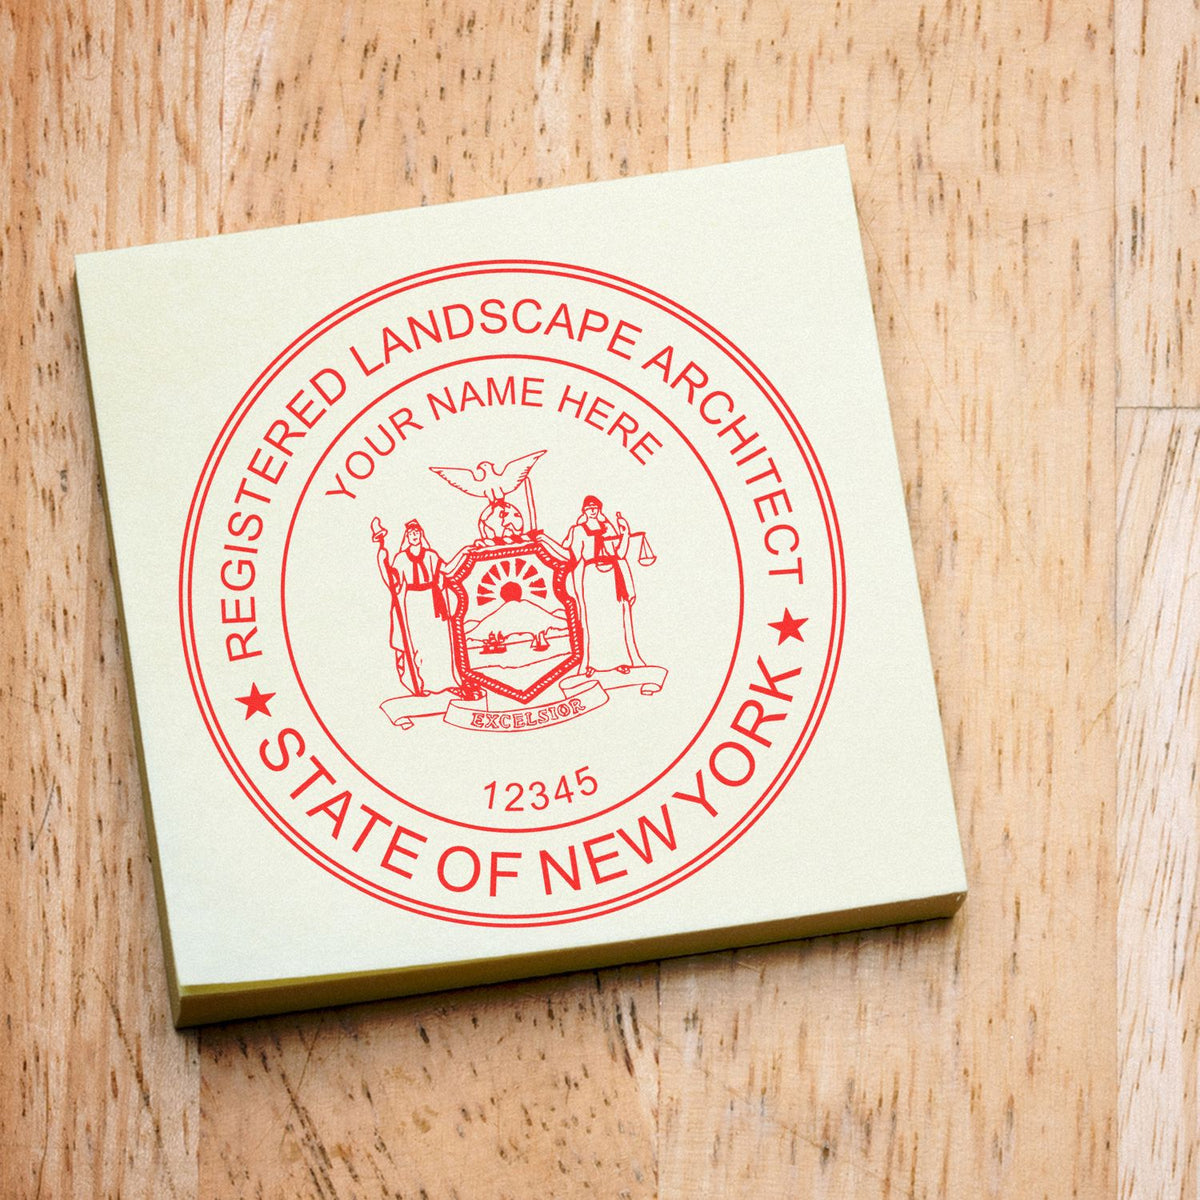 An alternative view of the Slim Pre-Inked New York Landscape Architect Seal Stamp stamped on a sheet of paper showing the image in use